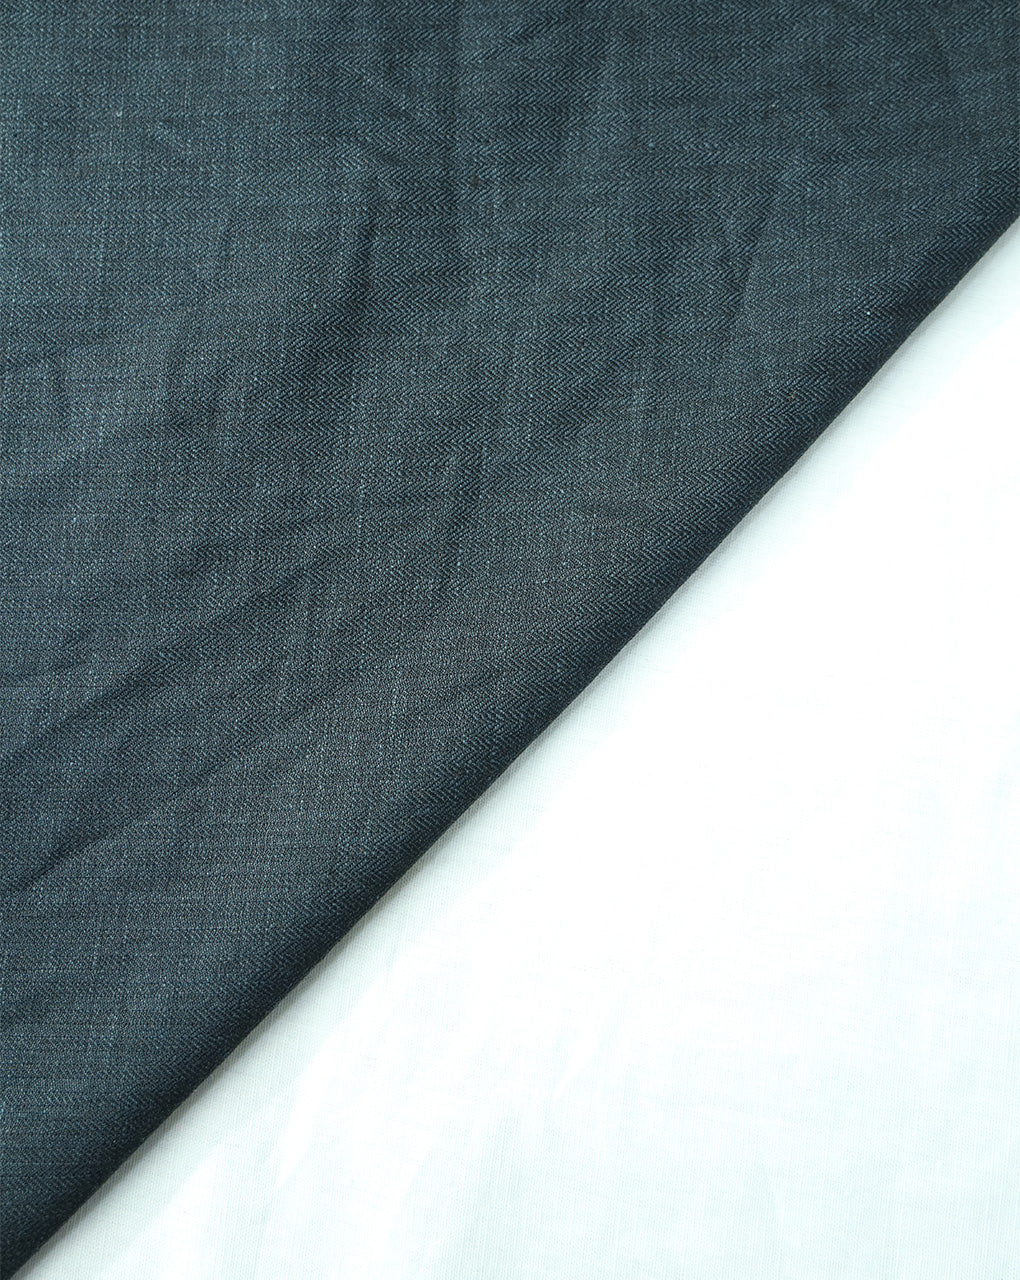 BLACK-GREY LINEN SUITING FABRIC